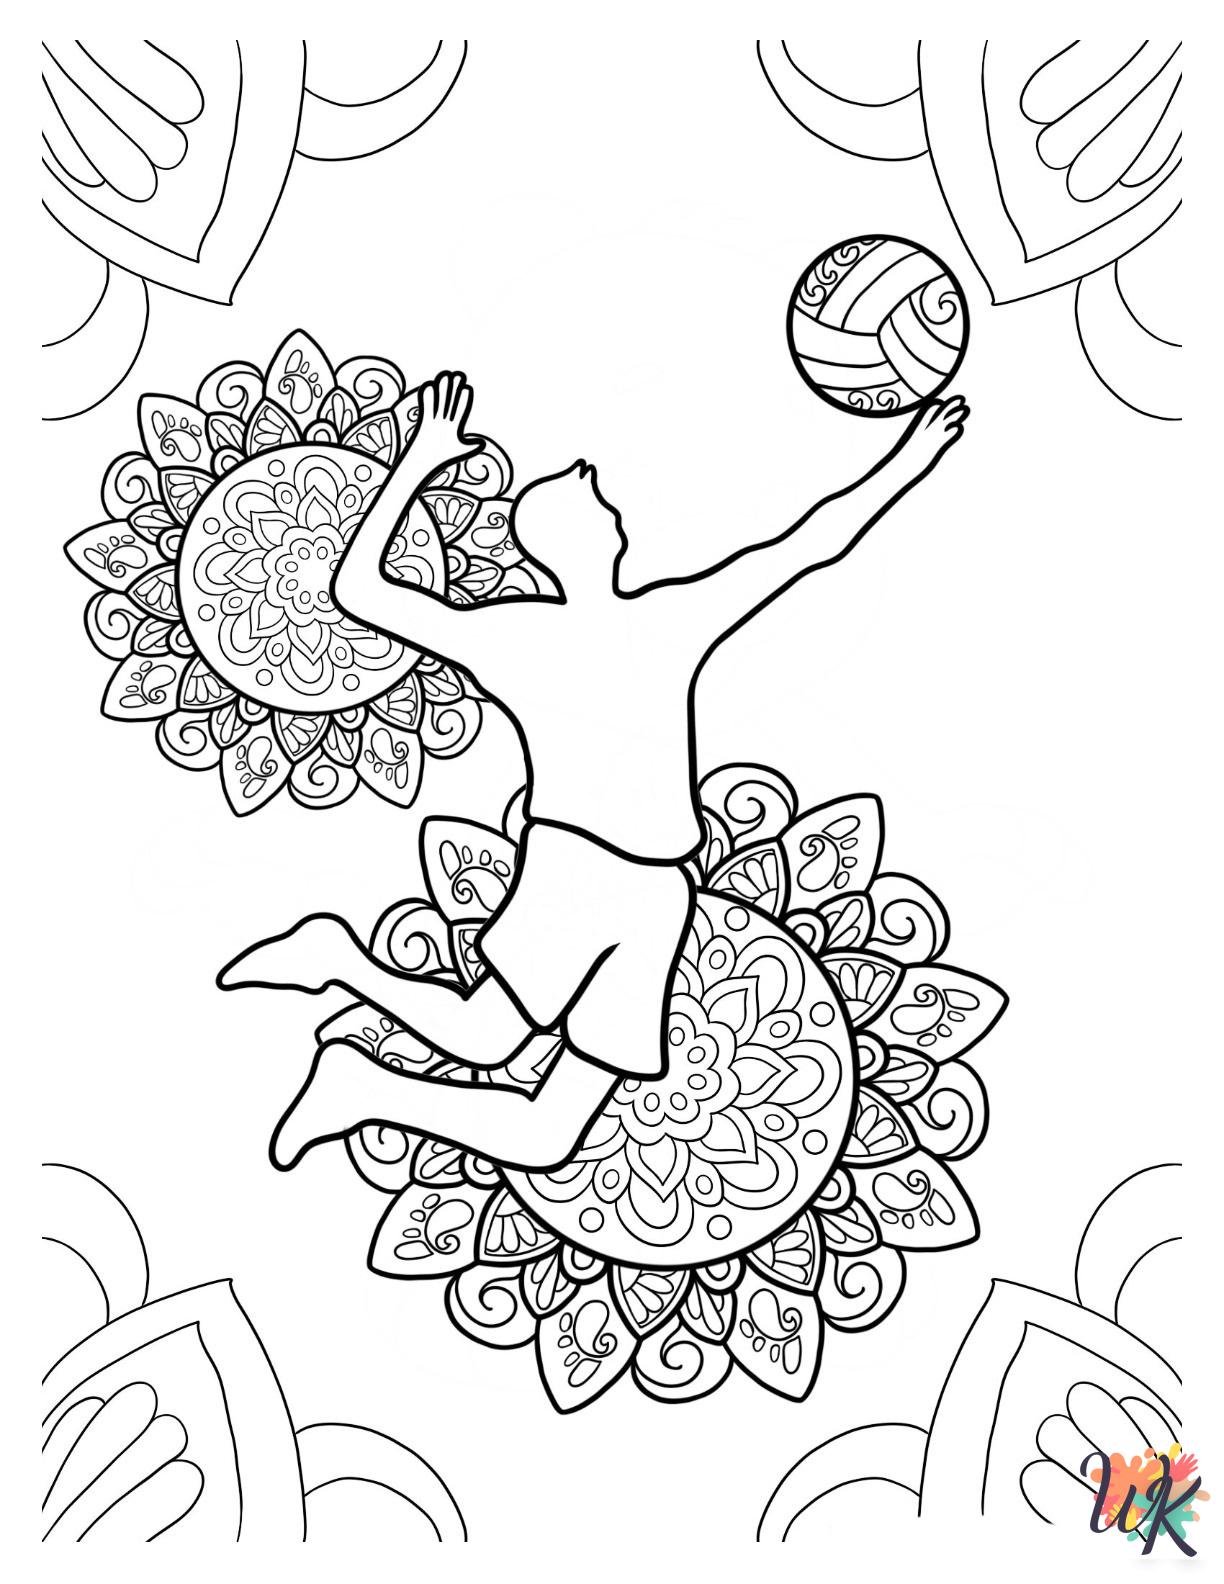 Volleyball coloring pages for preschoolers